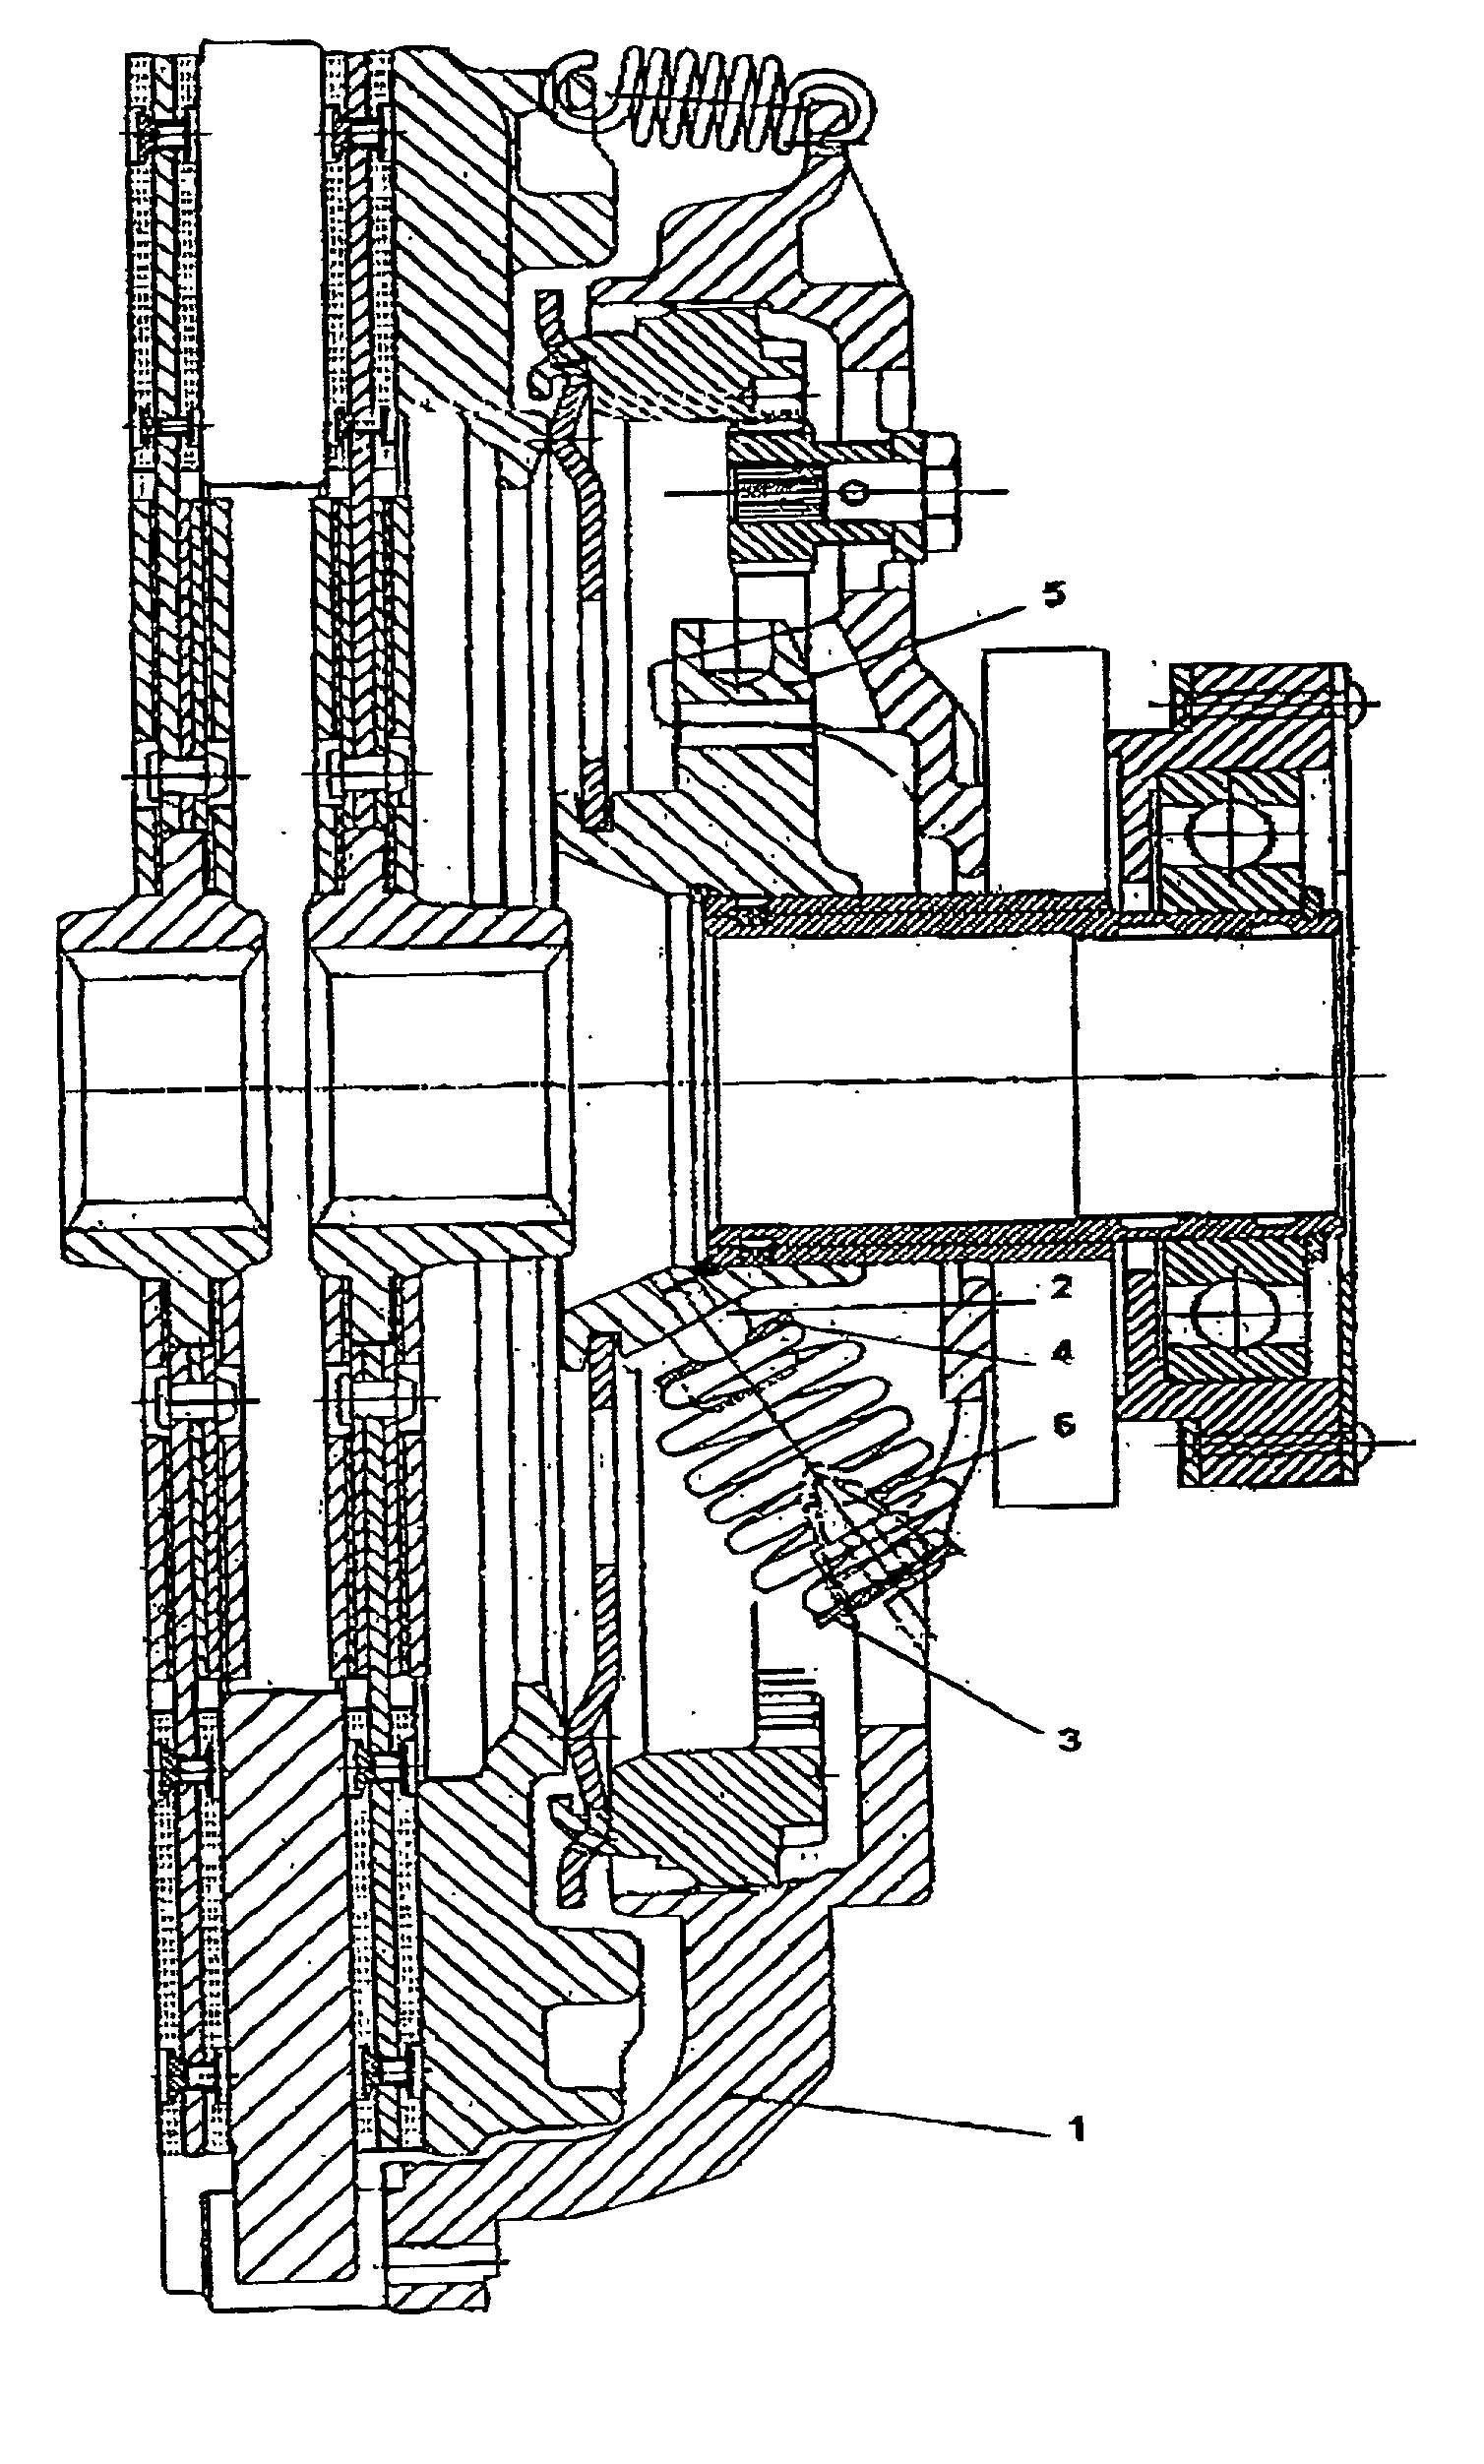 Pivot point release load adjuster assembly for use in a pull type angle spring clutch pressure plate assembly